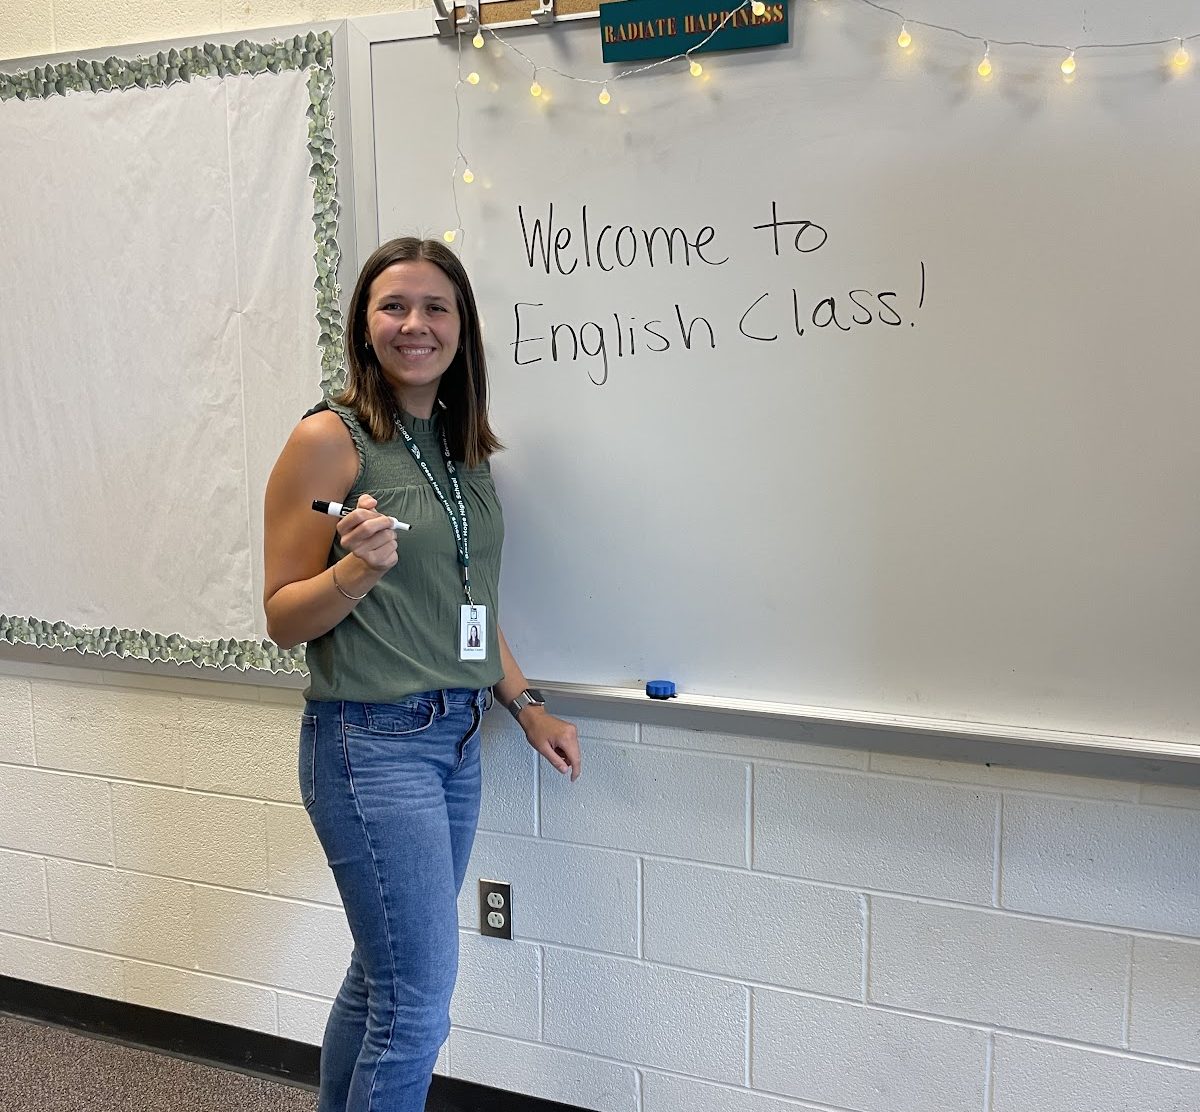 Once an elementary school teacher, Ms. Madeline Leamy now teaches English I and English III.